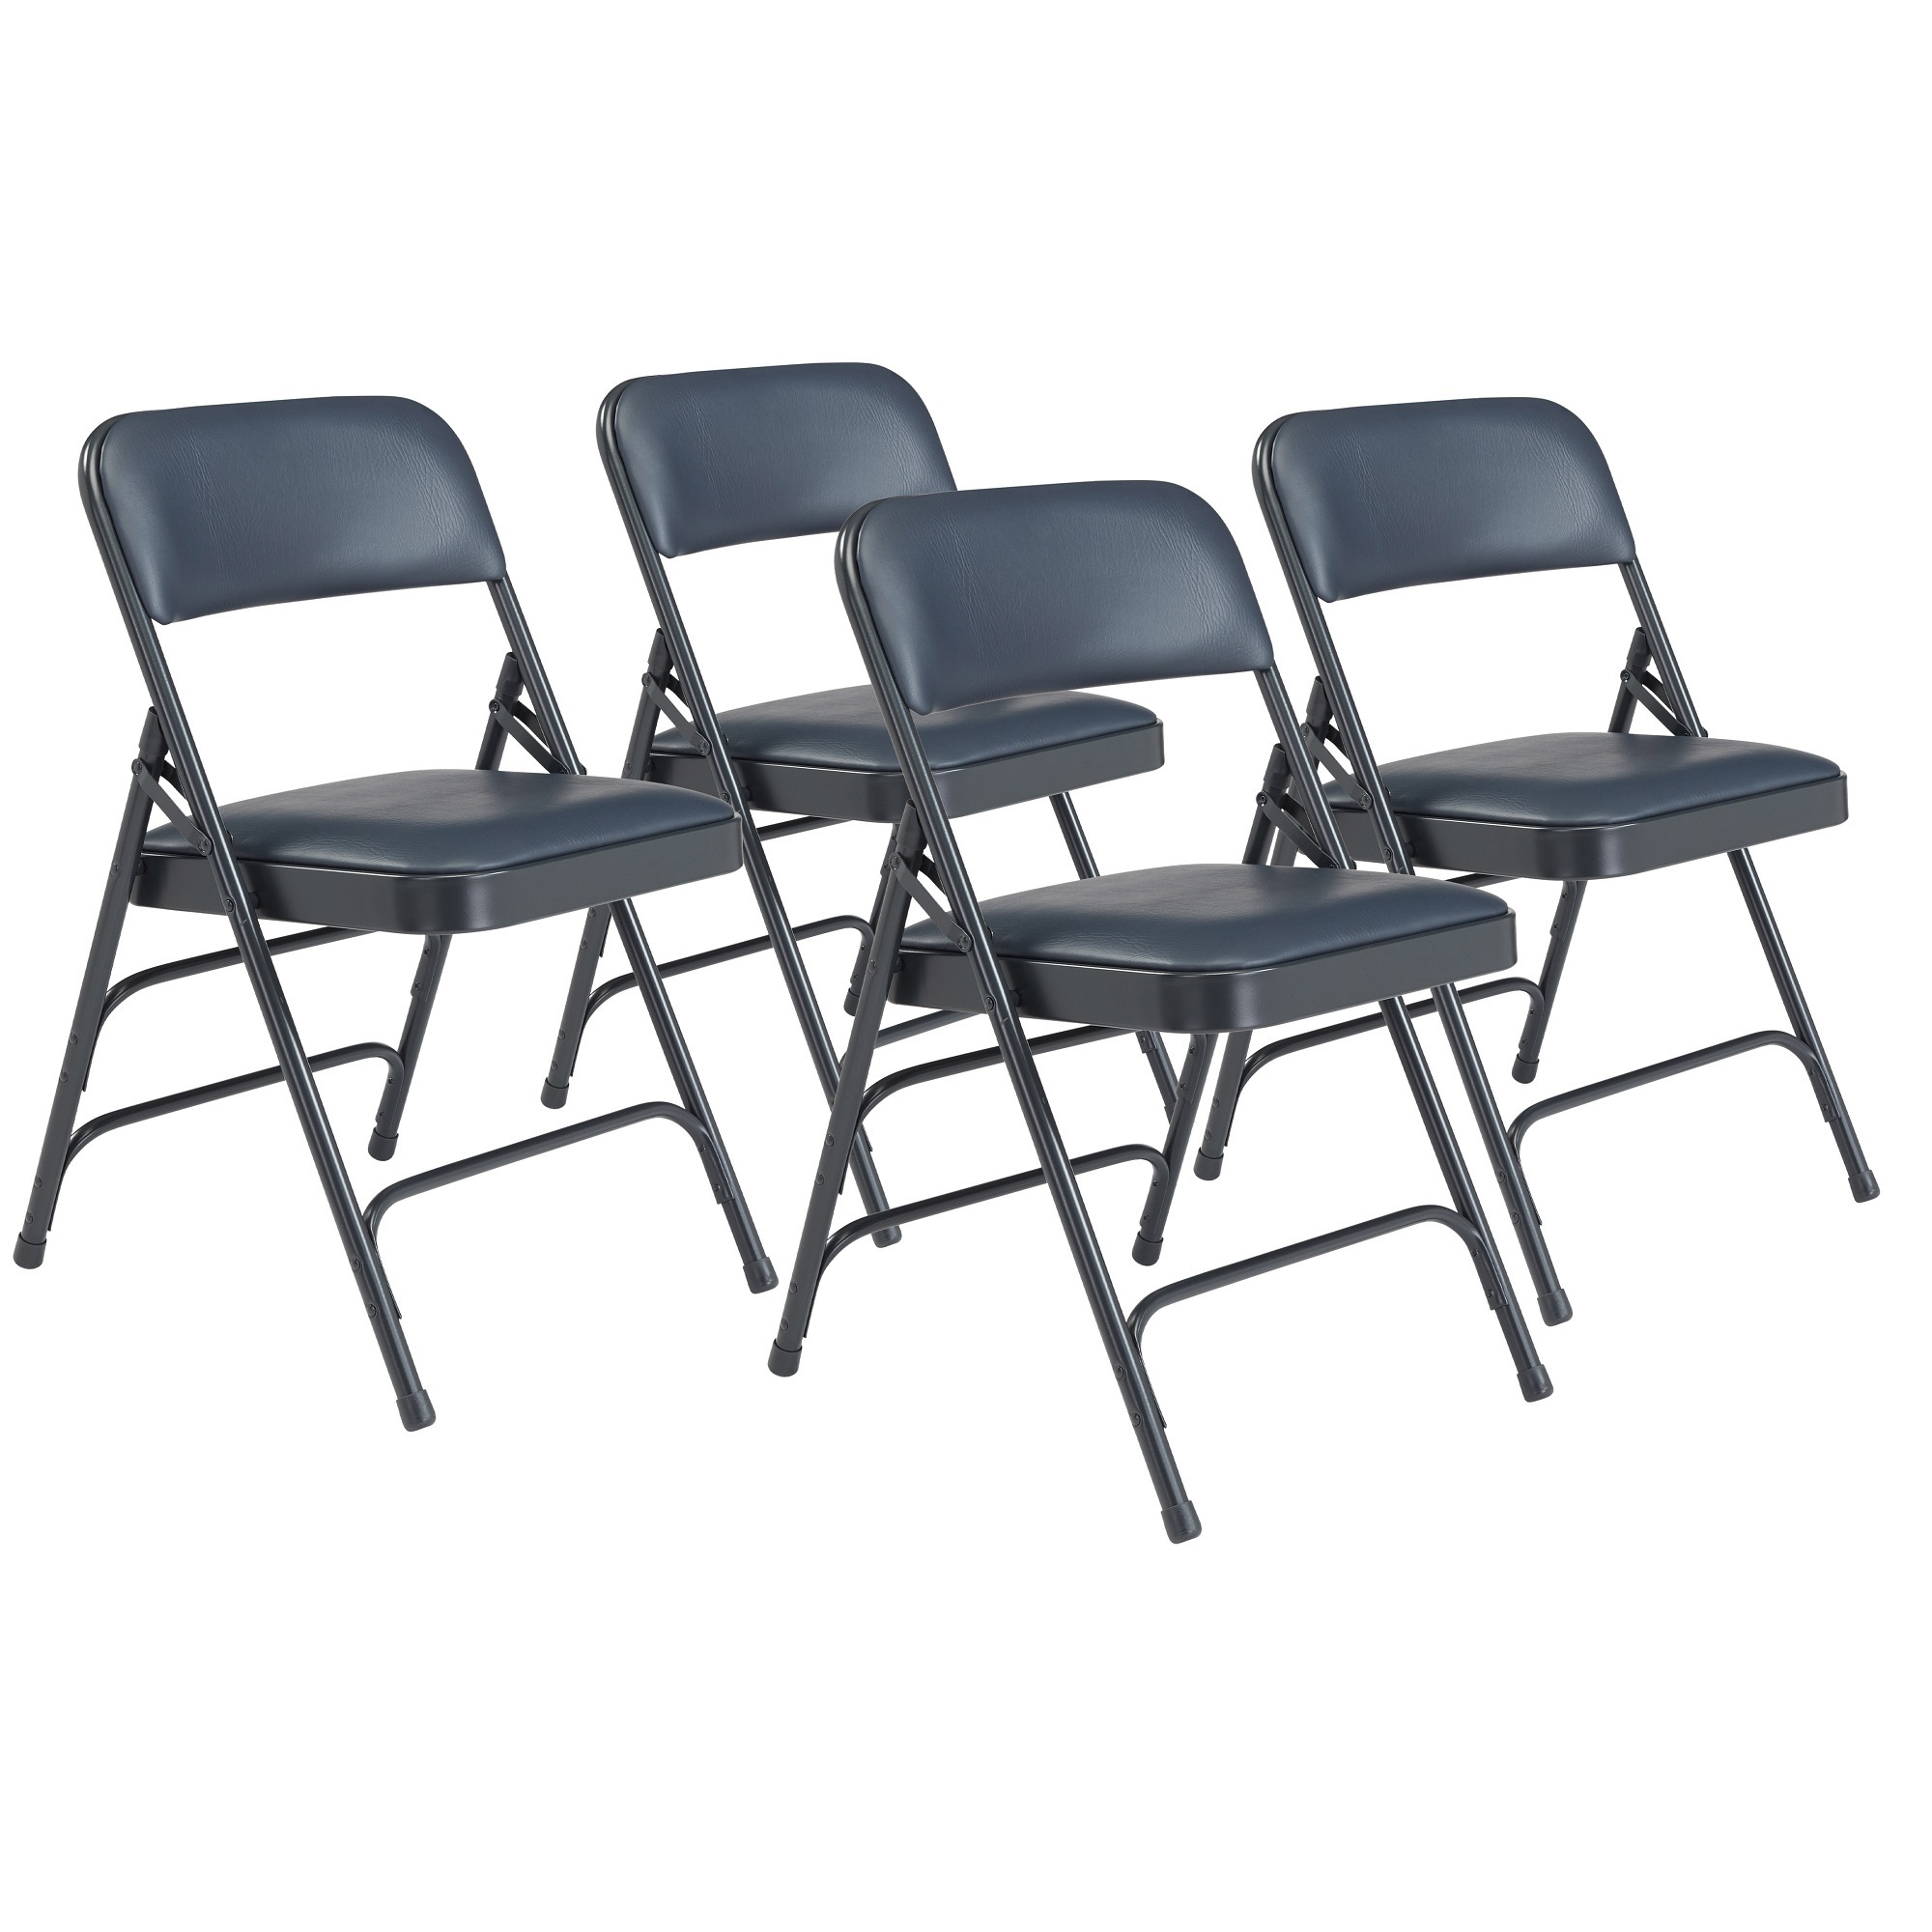 National Public Seating 1300 Series Premium Vinyl Upholstered Triple Brace Double Hinge Folding Chairs, 4-Pack -  1304